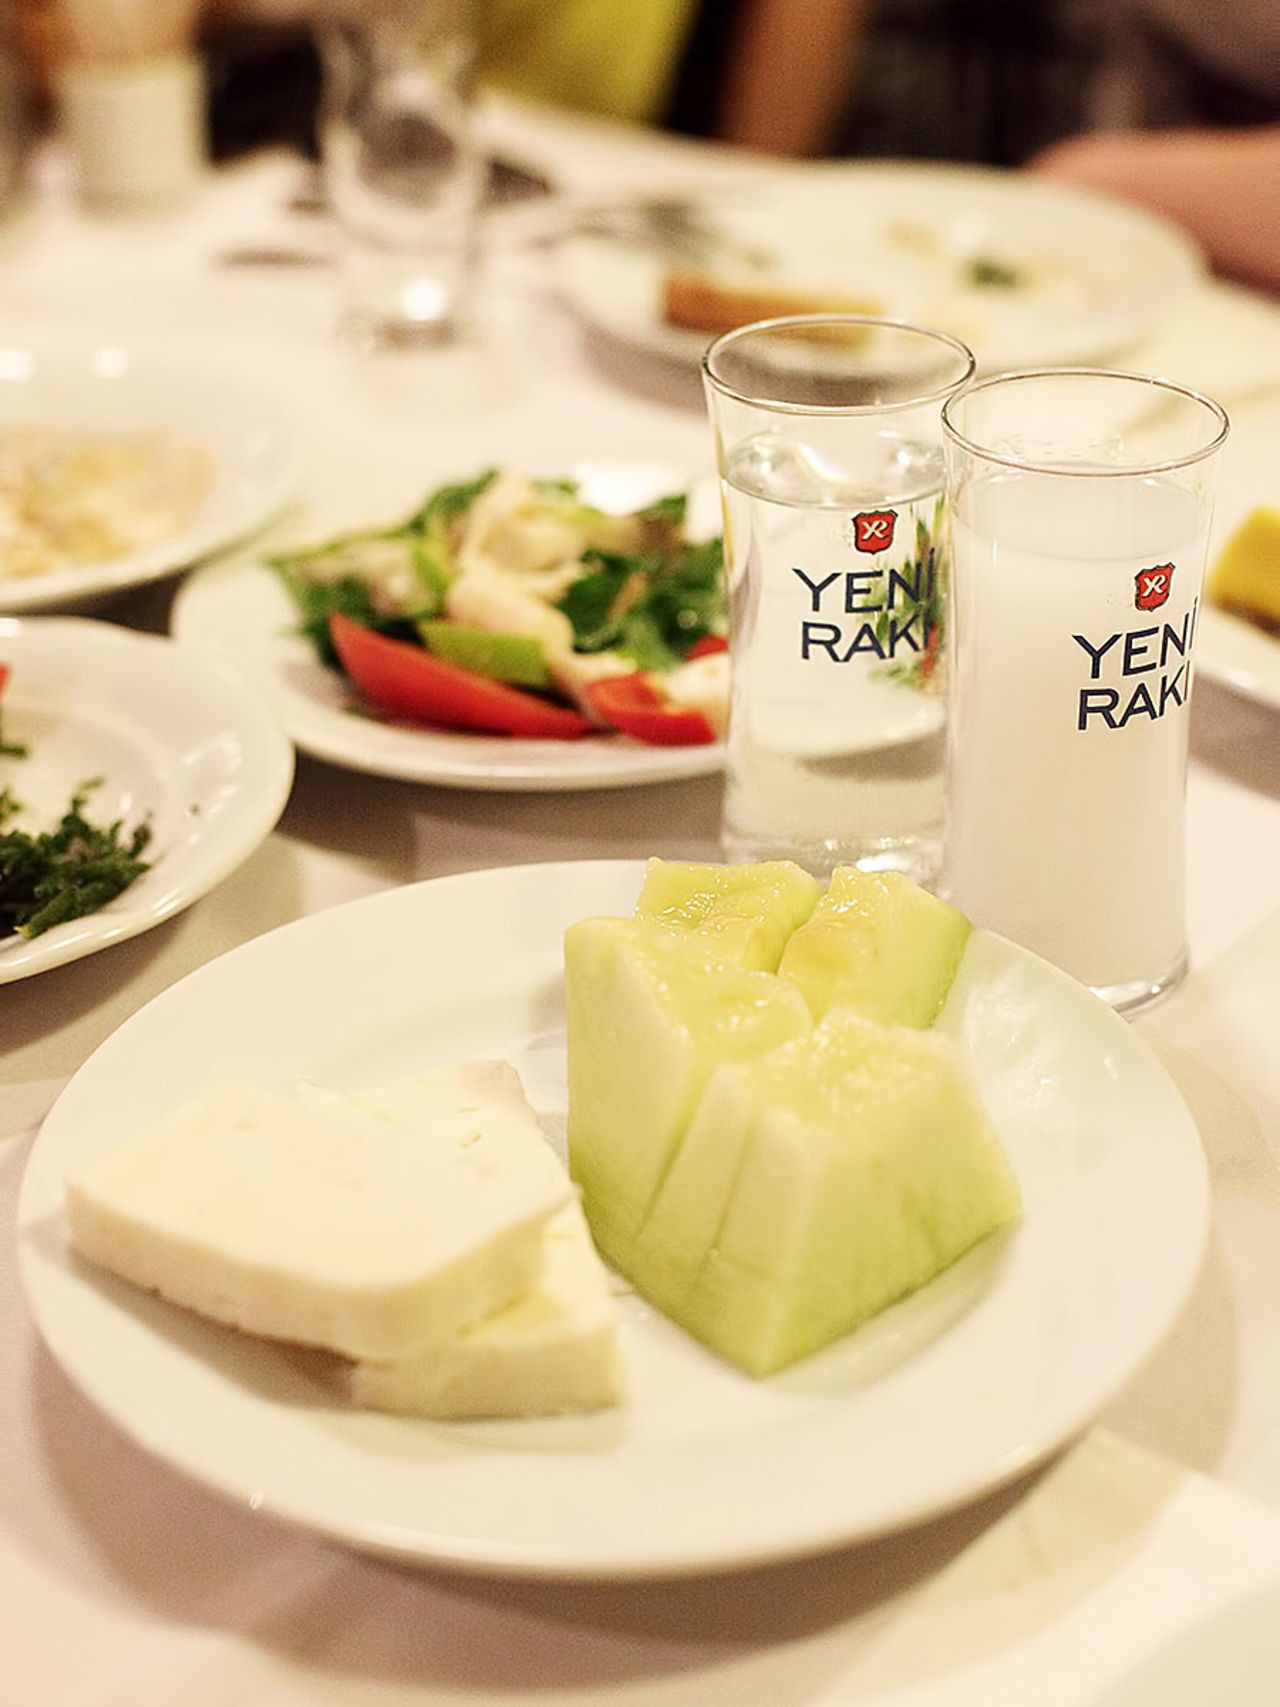 Feta and melons are the first meze to appear at a raki gathering. You don't even have to order them.